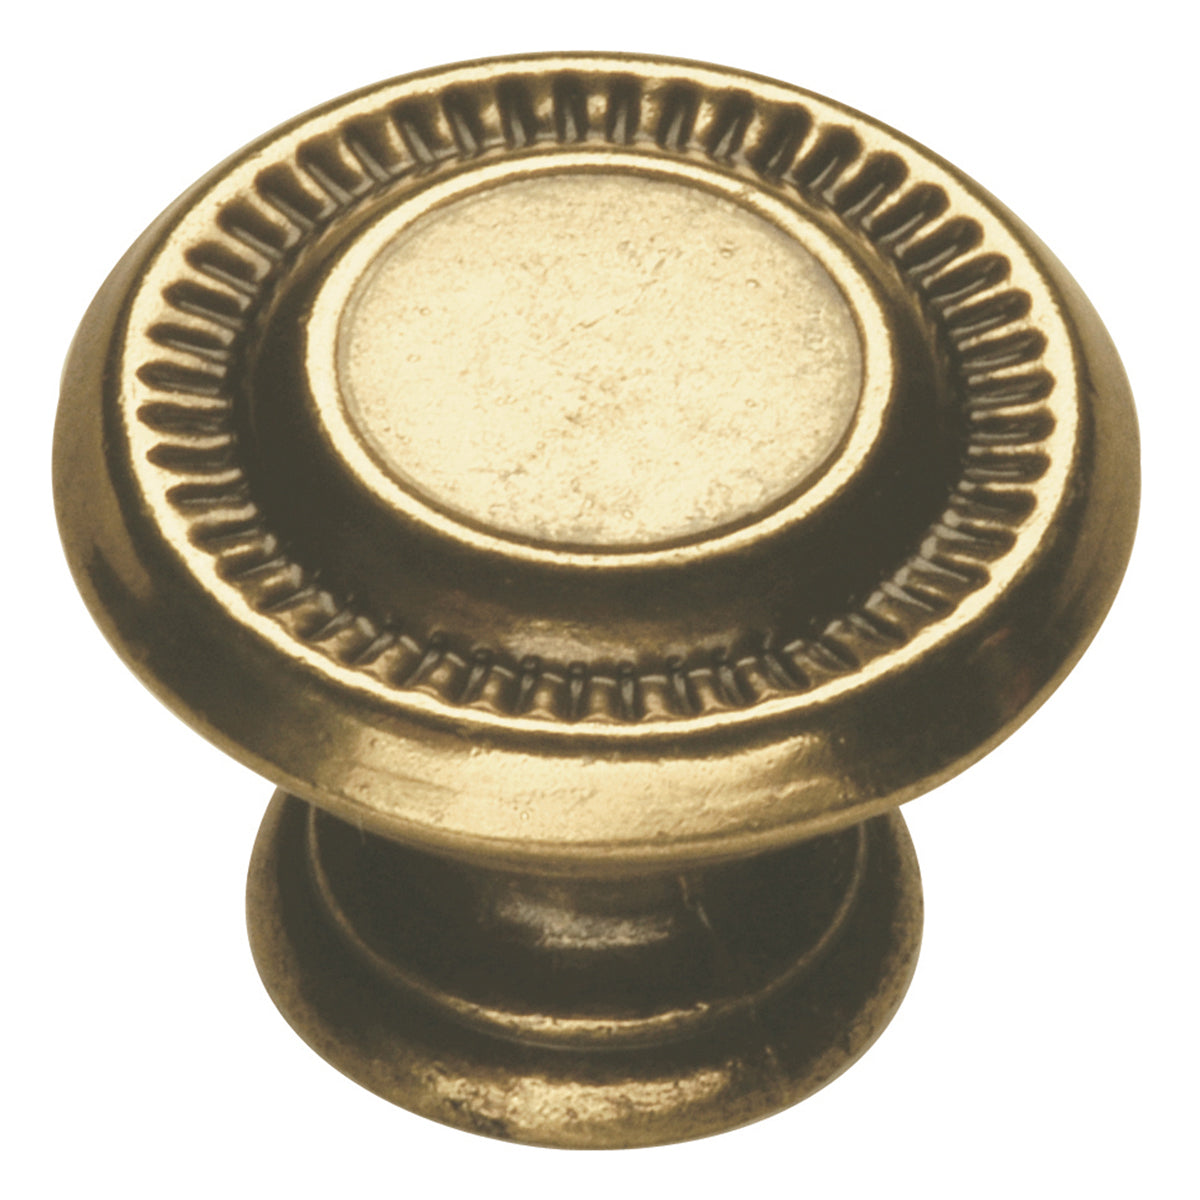 Cabinet Knob 1 Inch Diameter in Lancaster Hand Polished - Manor House Collection